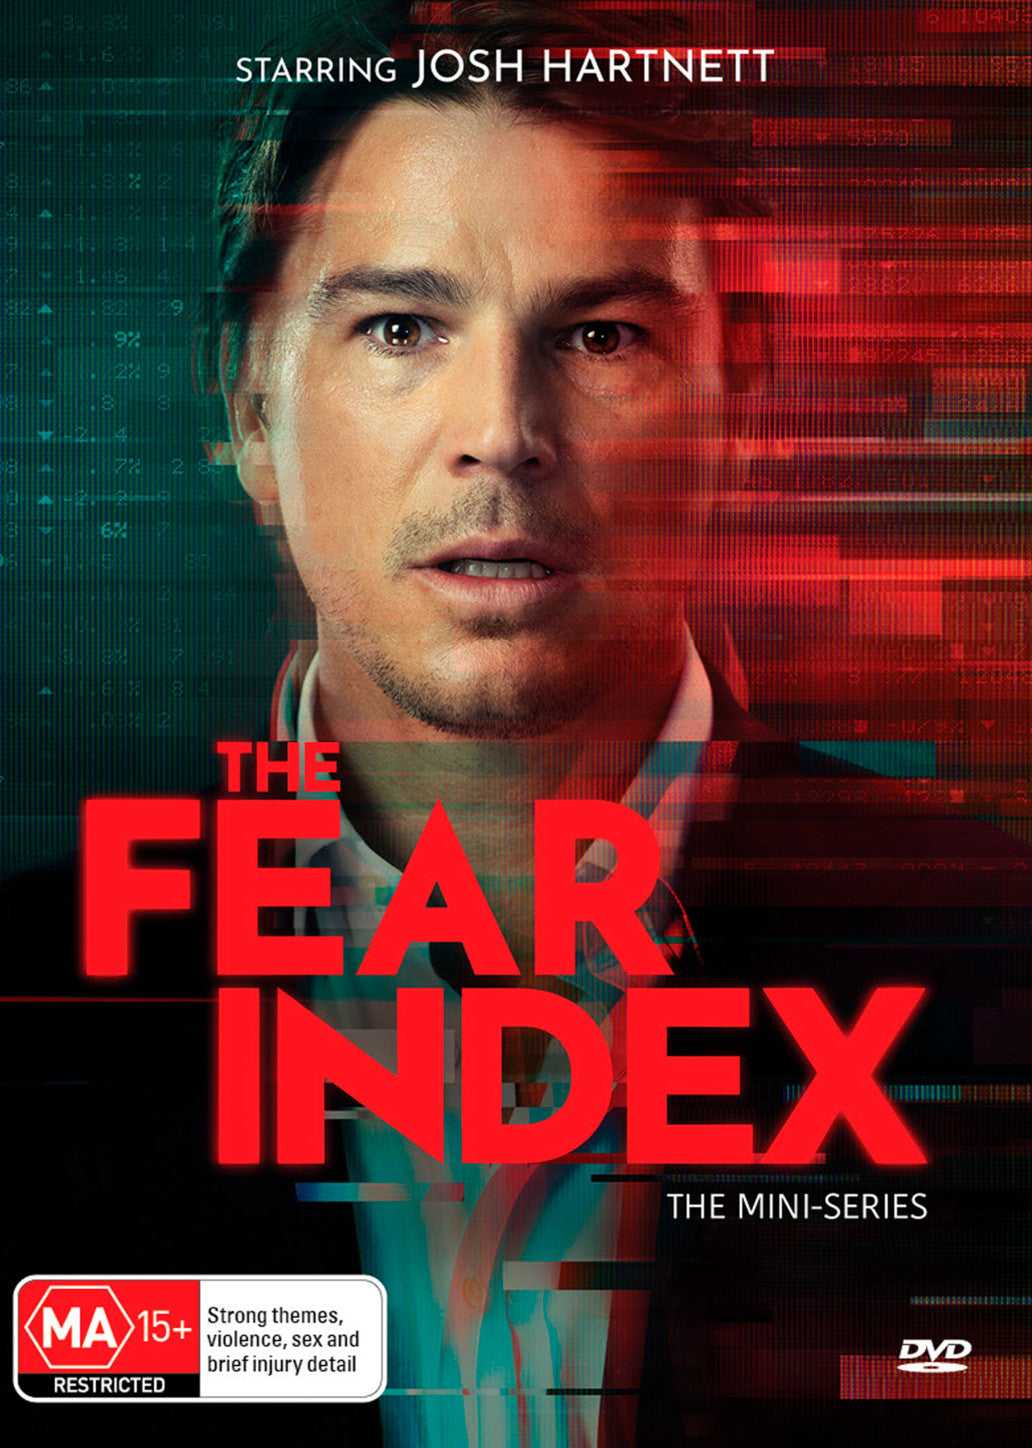 THE FEAR INDEX: THE MINI-SERIES